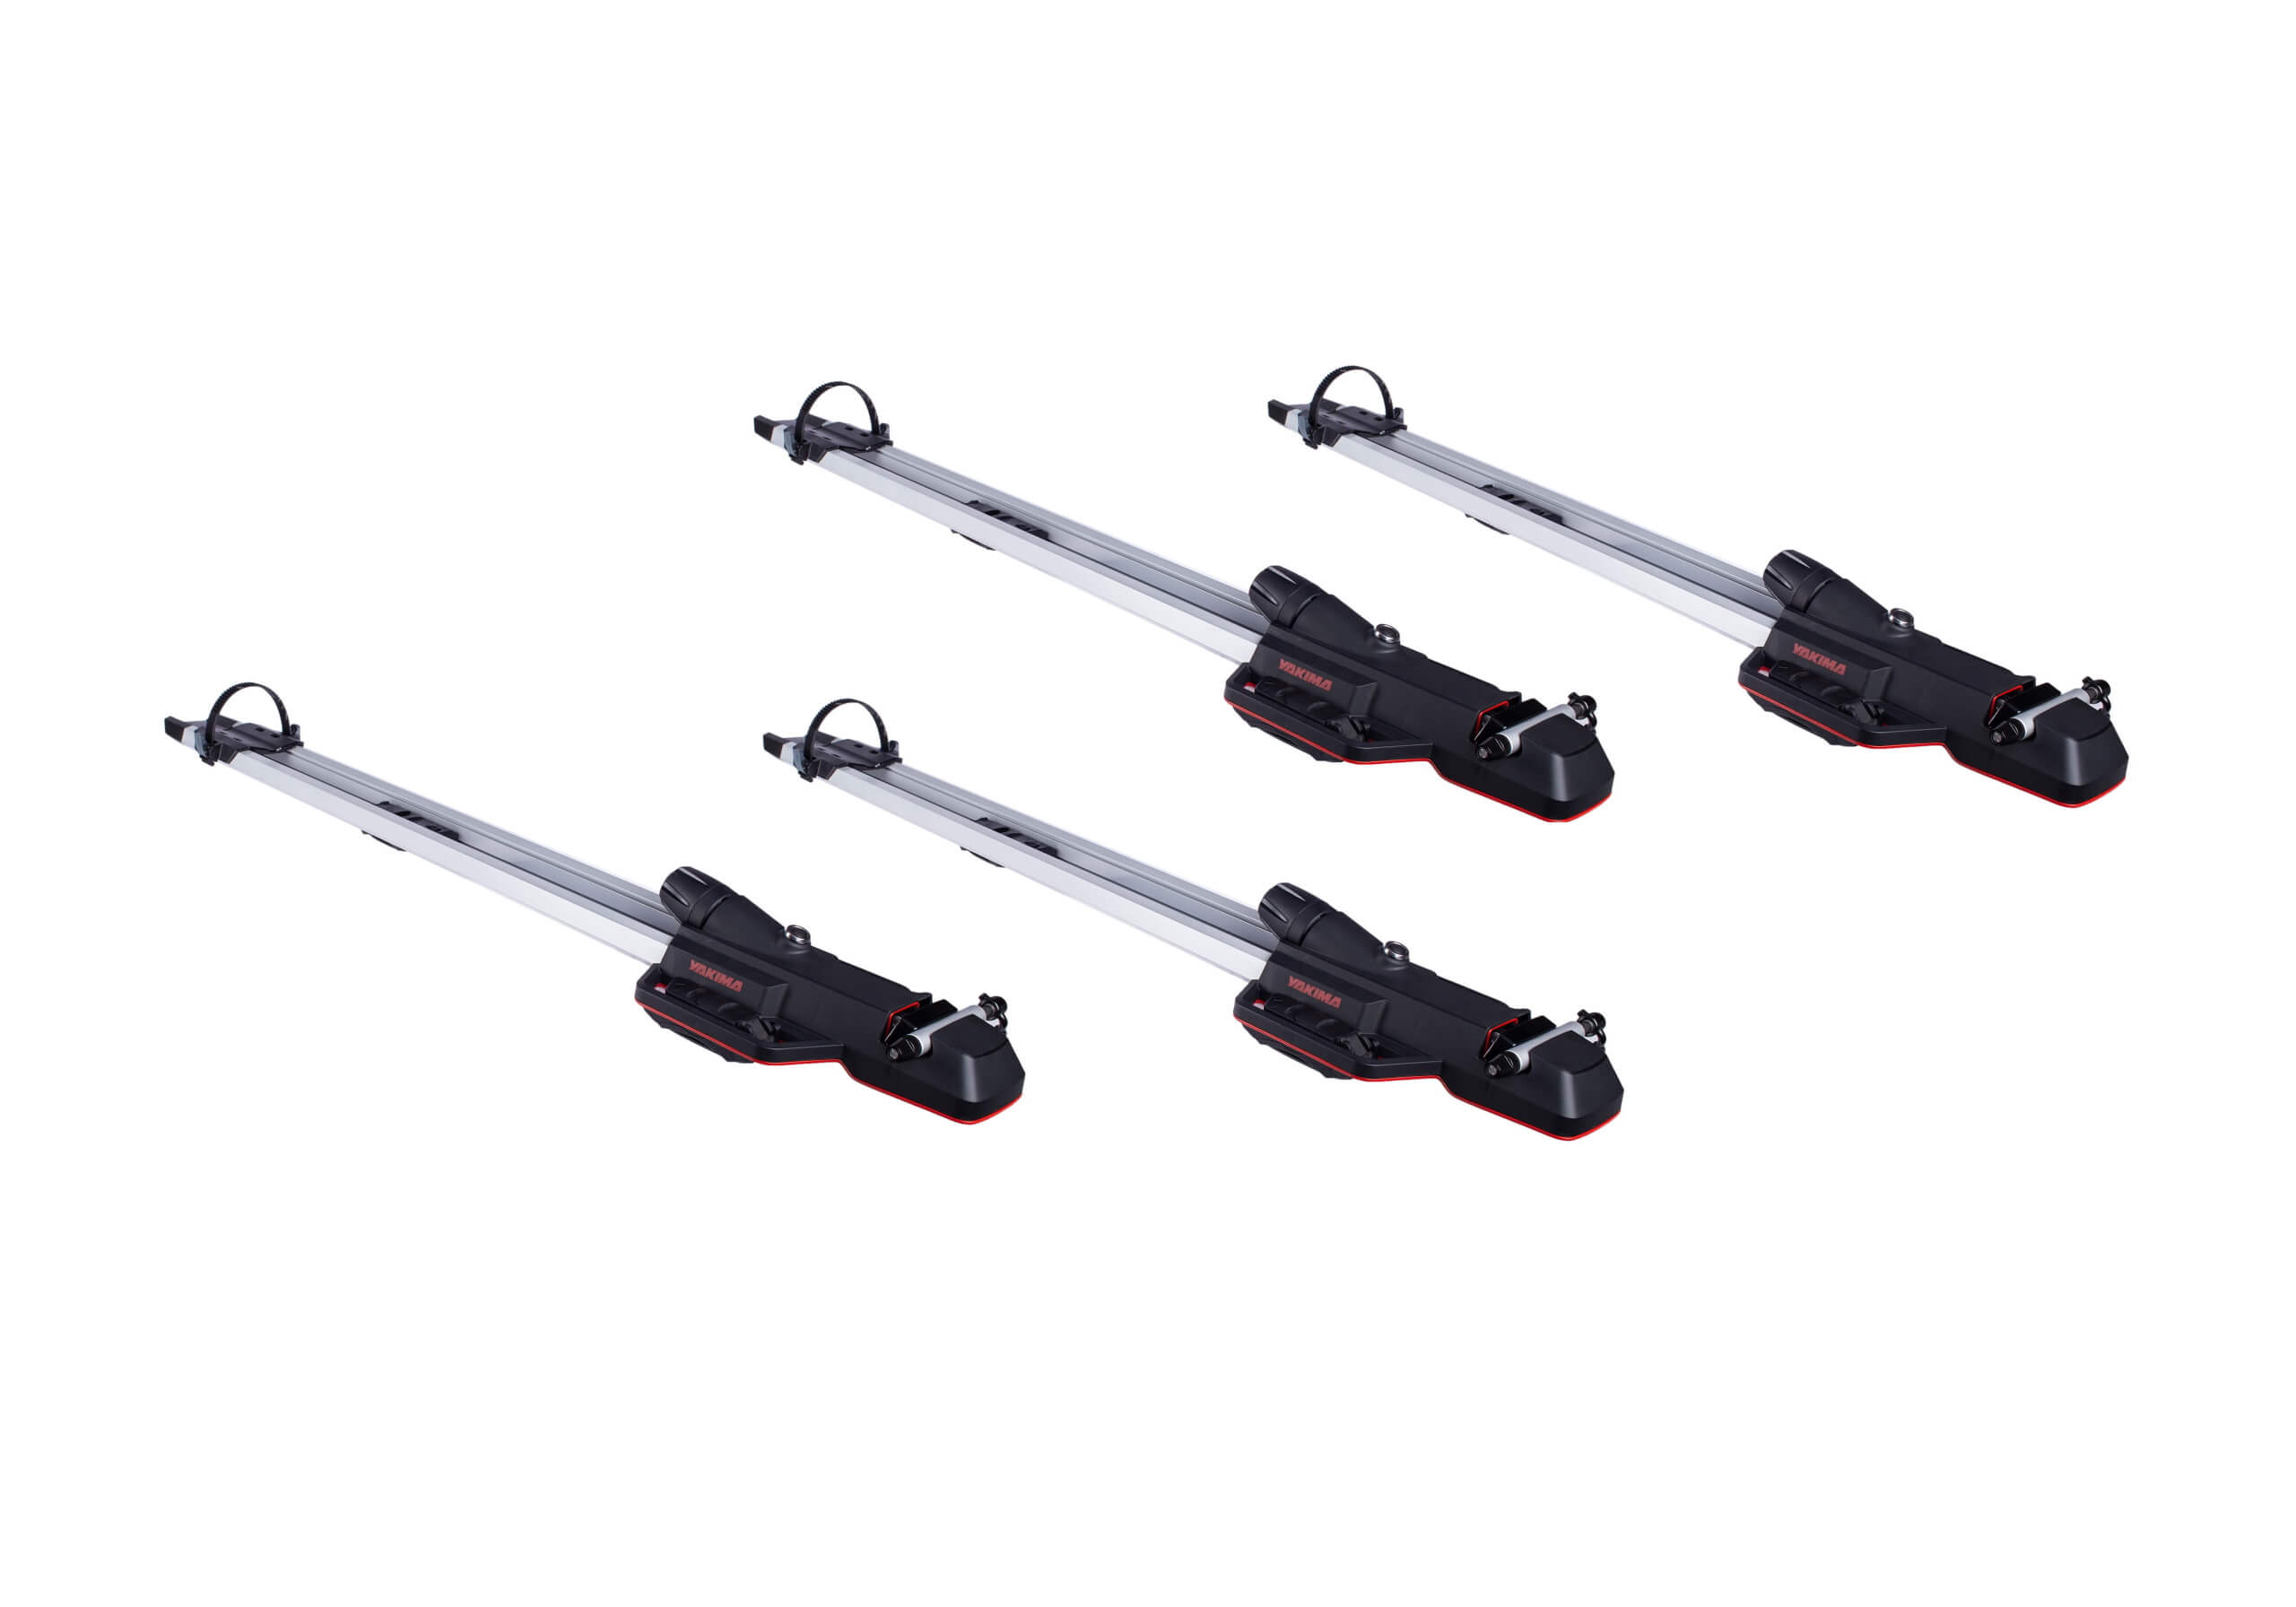 4 x silver Yakima HighSpeed 8002129 forkmounts with locking roof bars